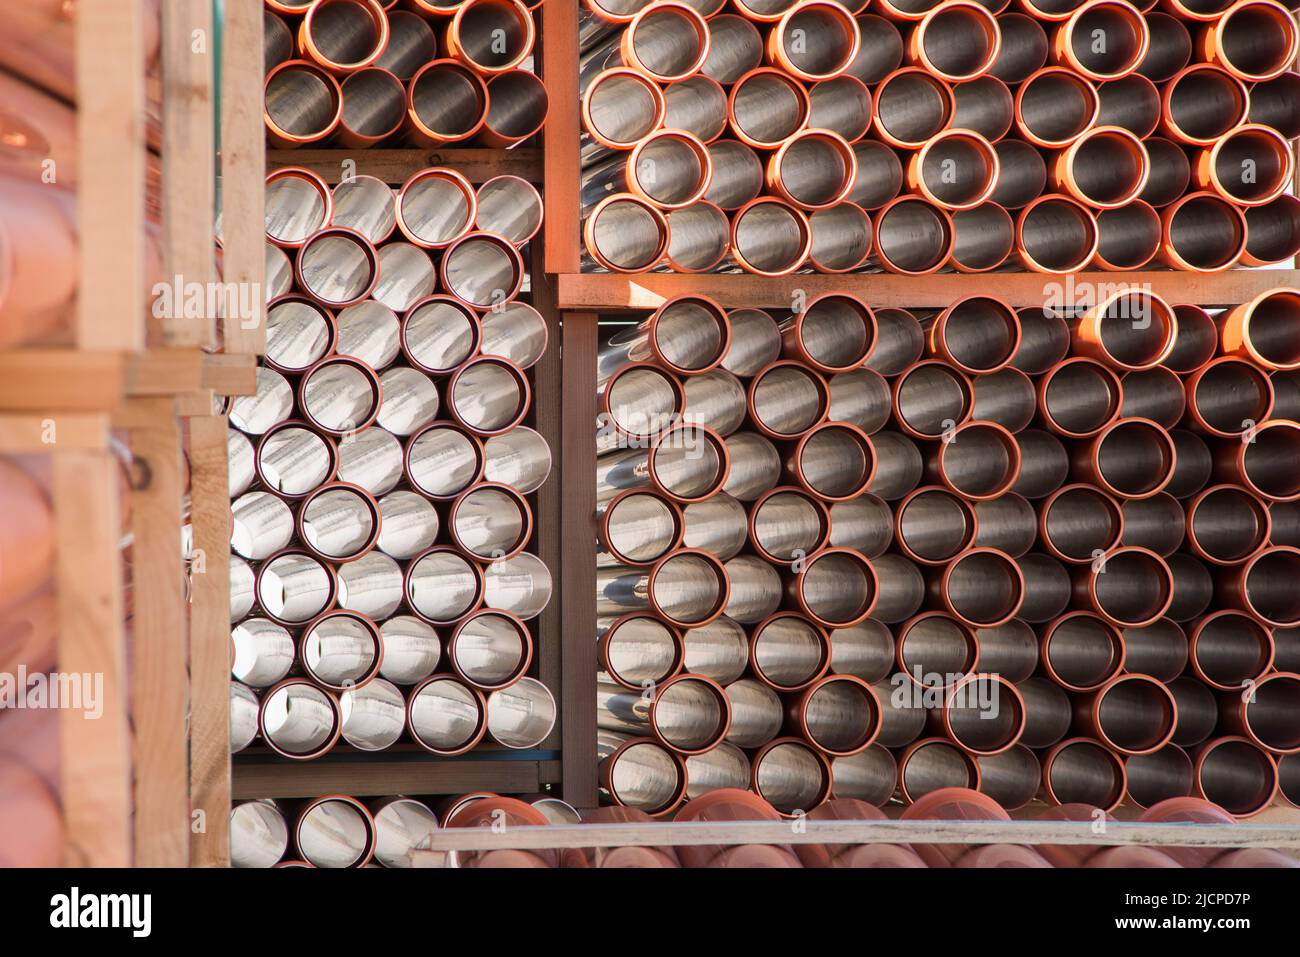 Background of orange plastic sewage pipes used at the building site. Texture and pattern of plastic drainage pipe. Light through tubes. Stock Photo